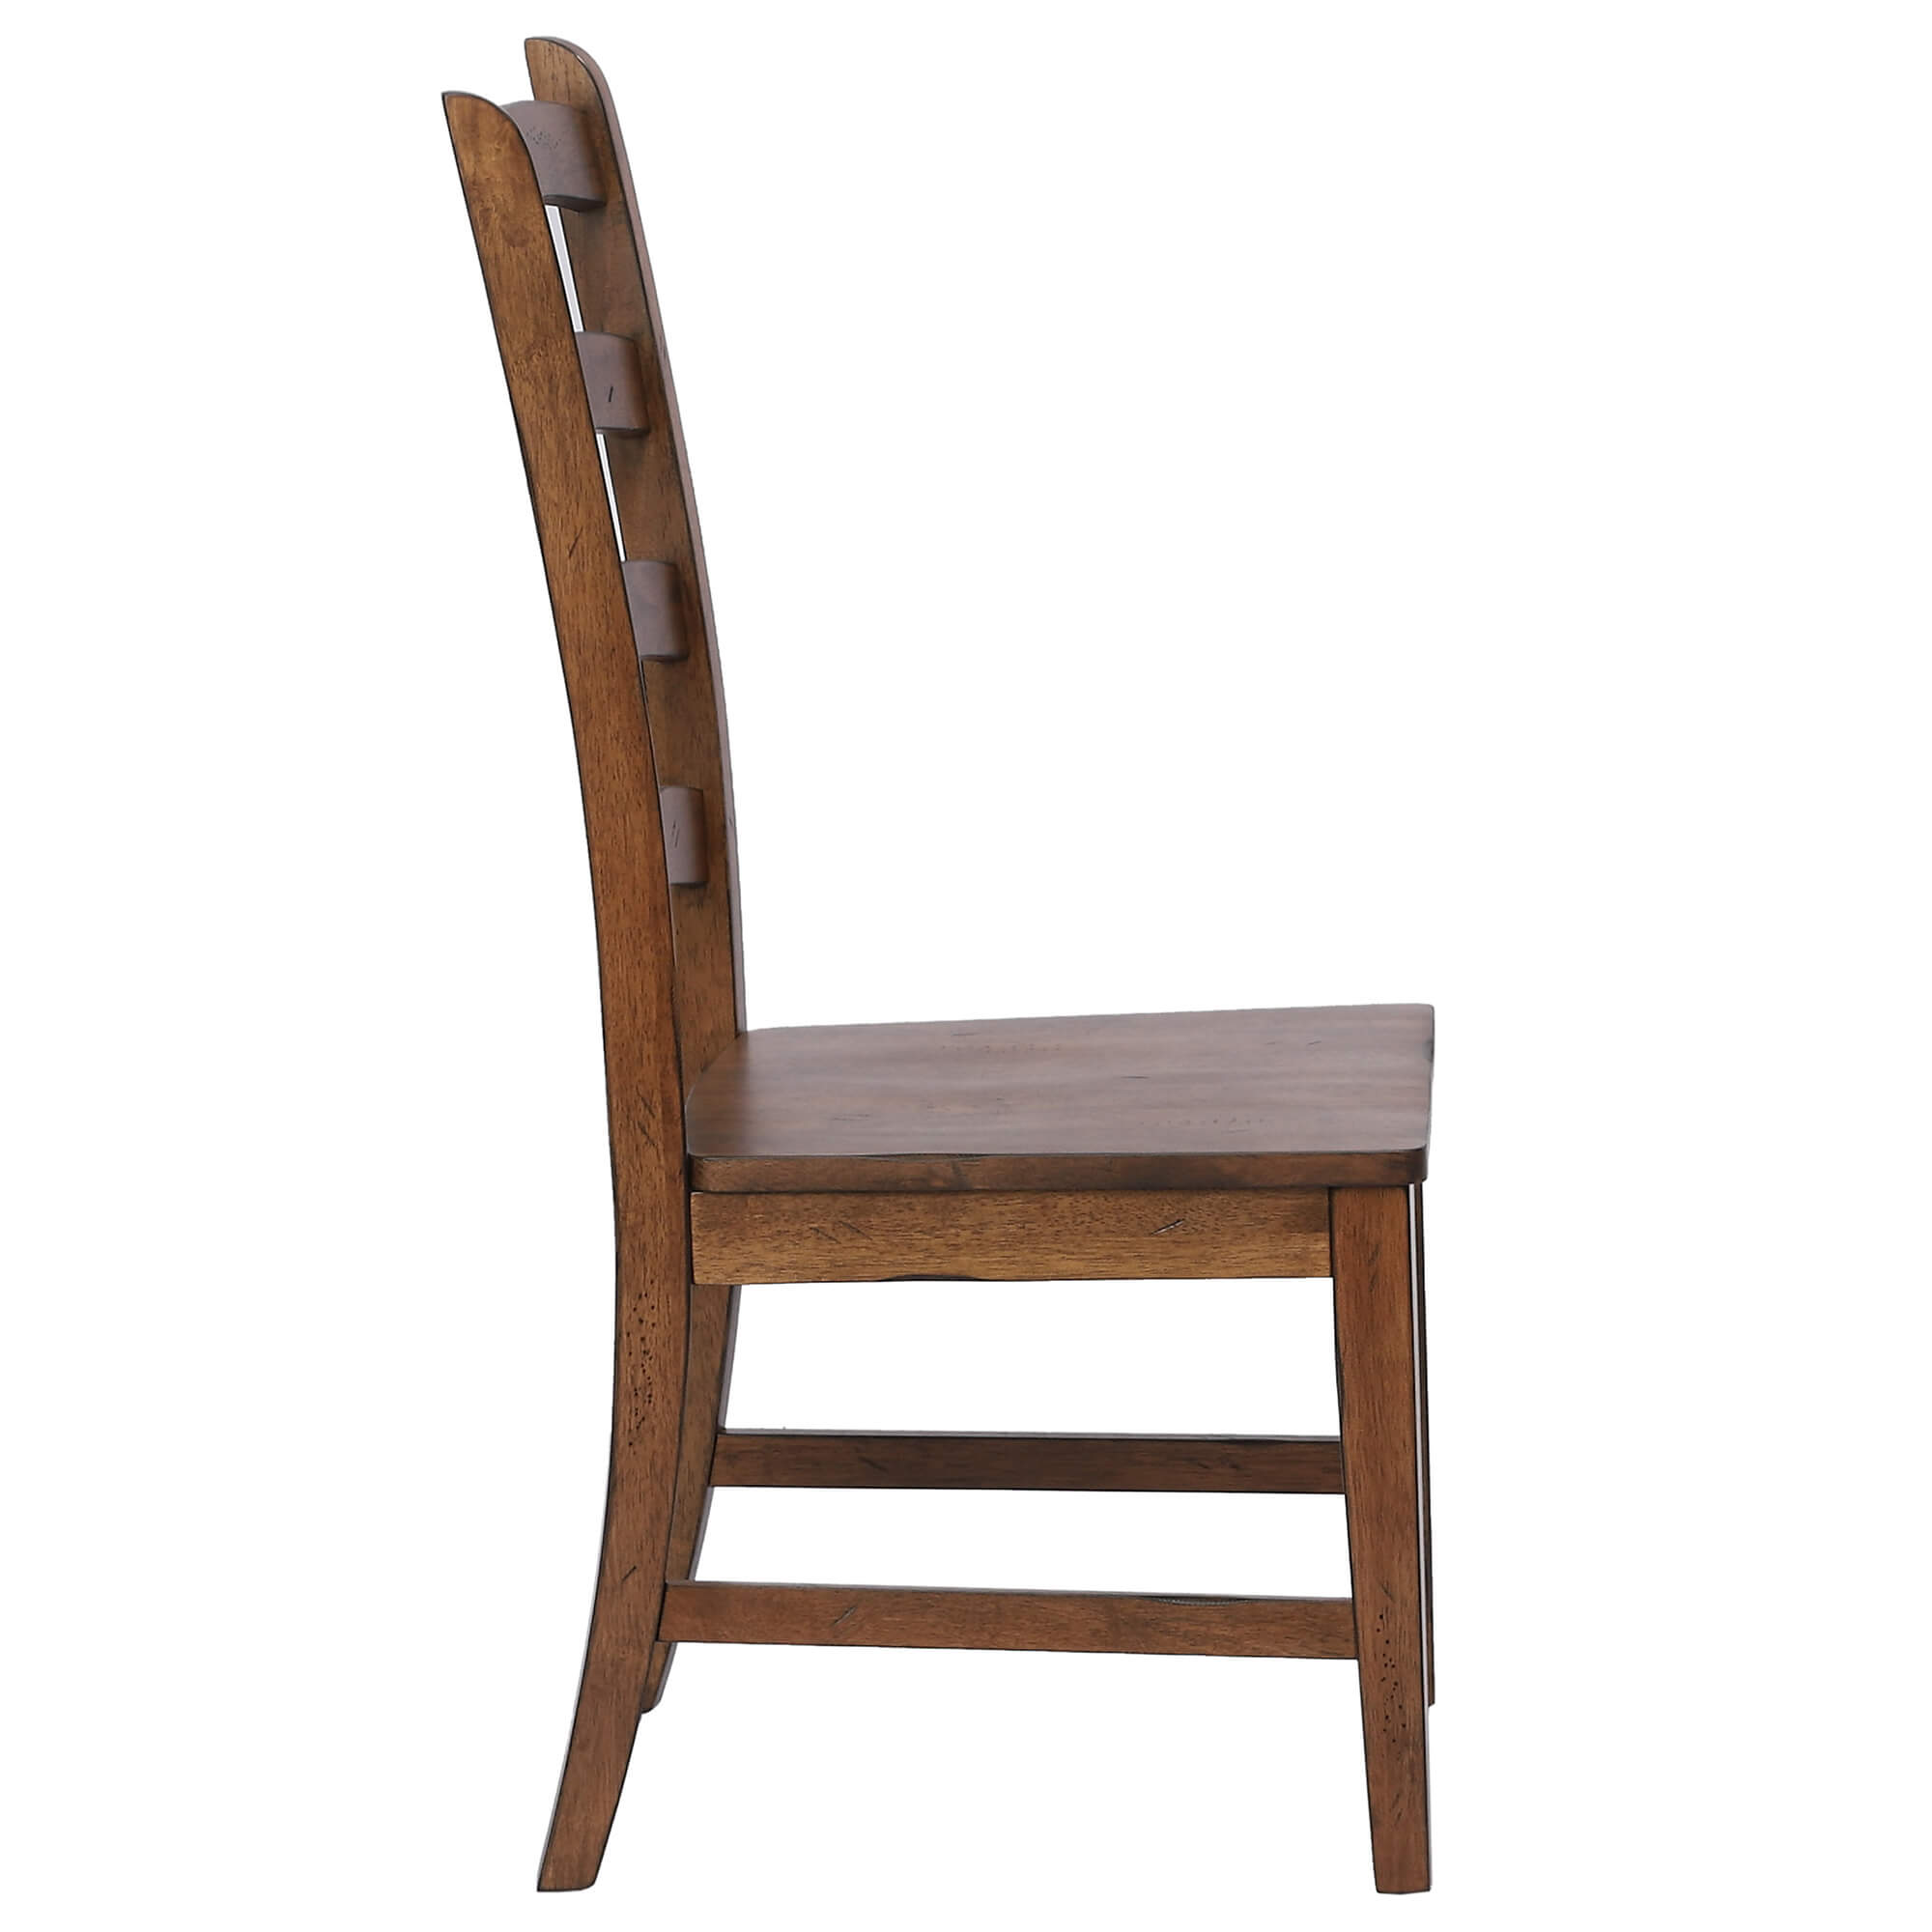 Amish Galloway Shaker Ladder Back Chair